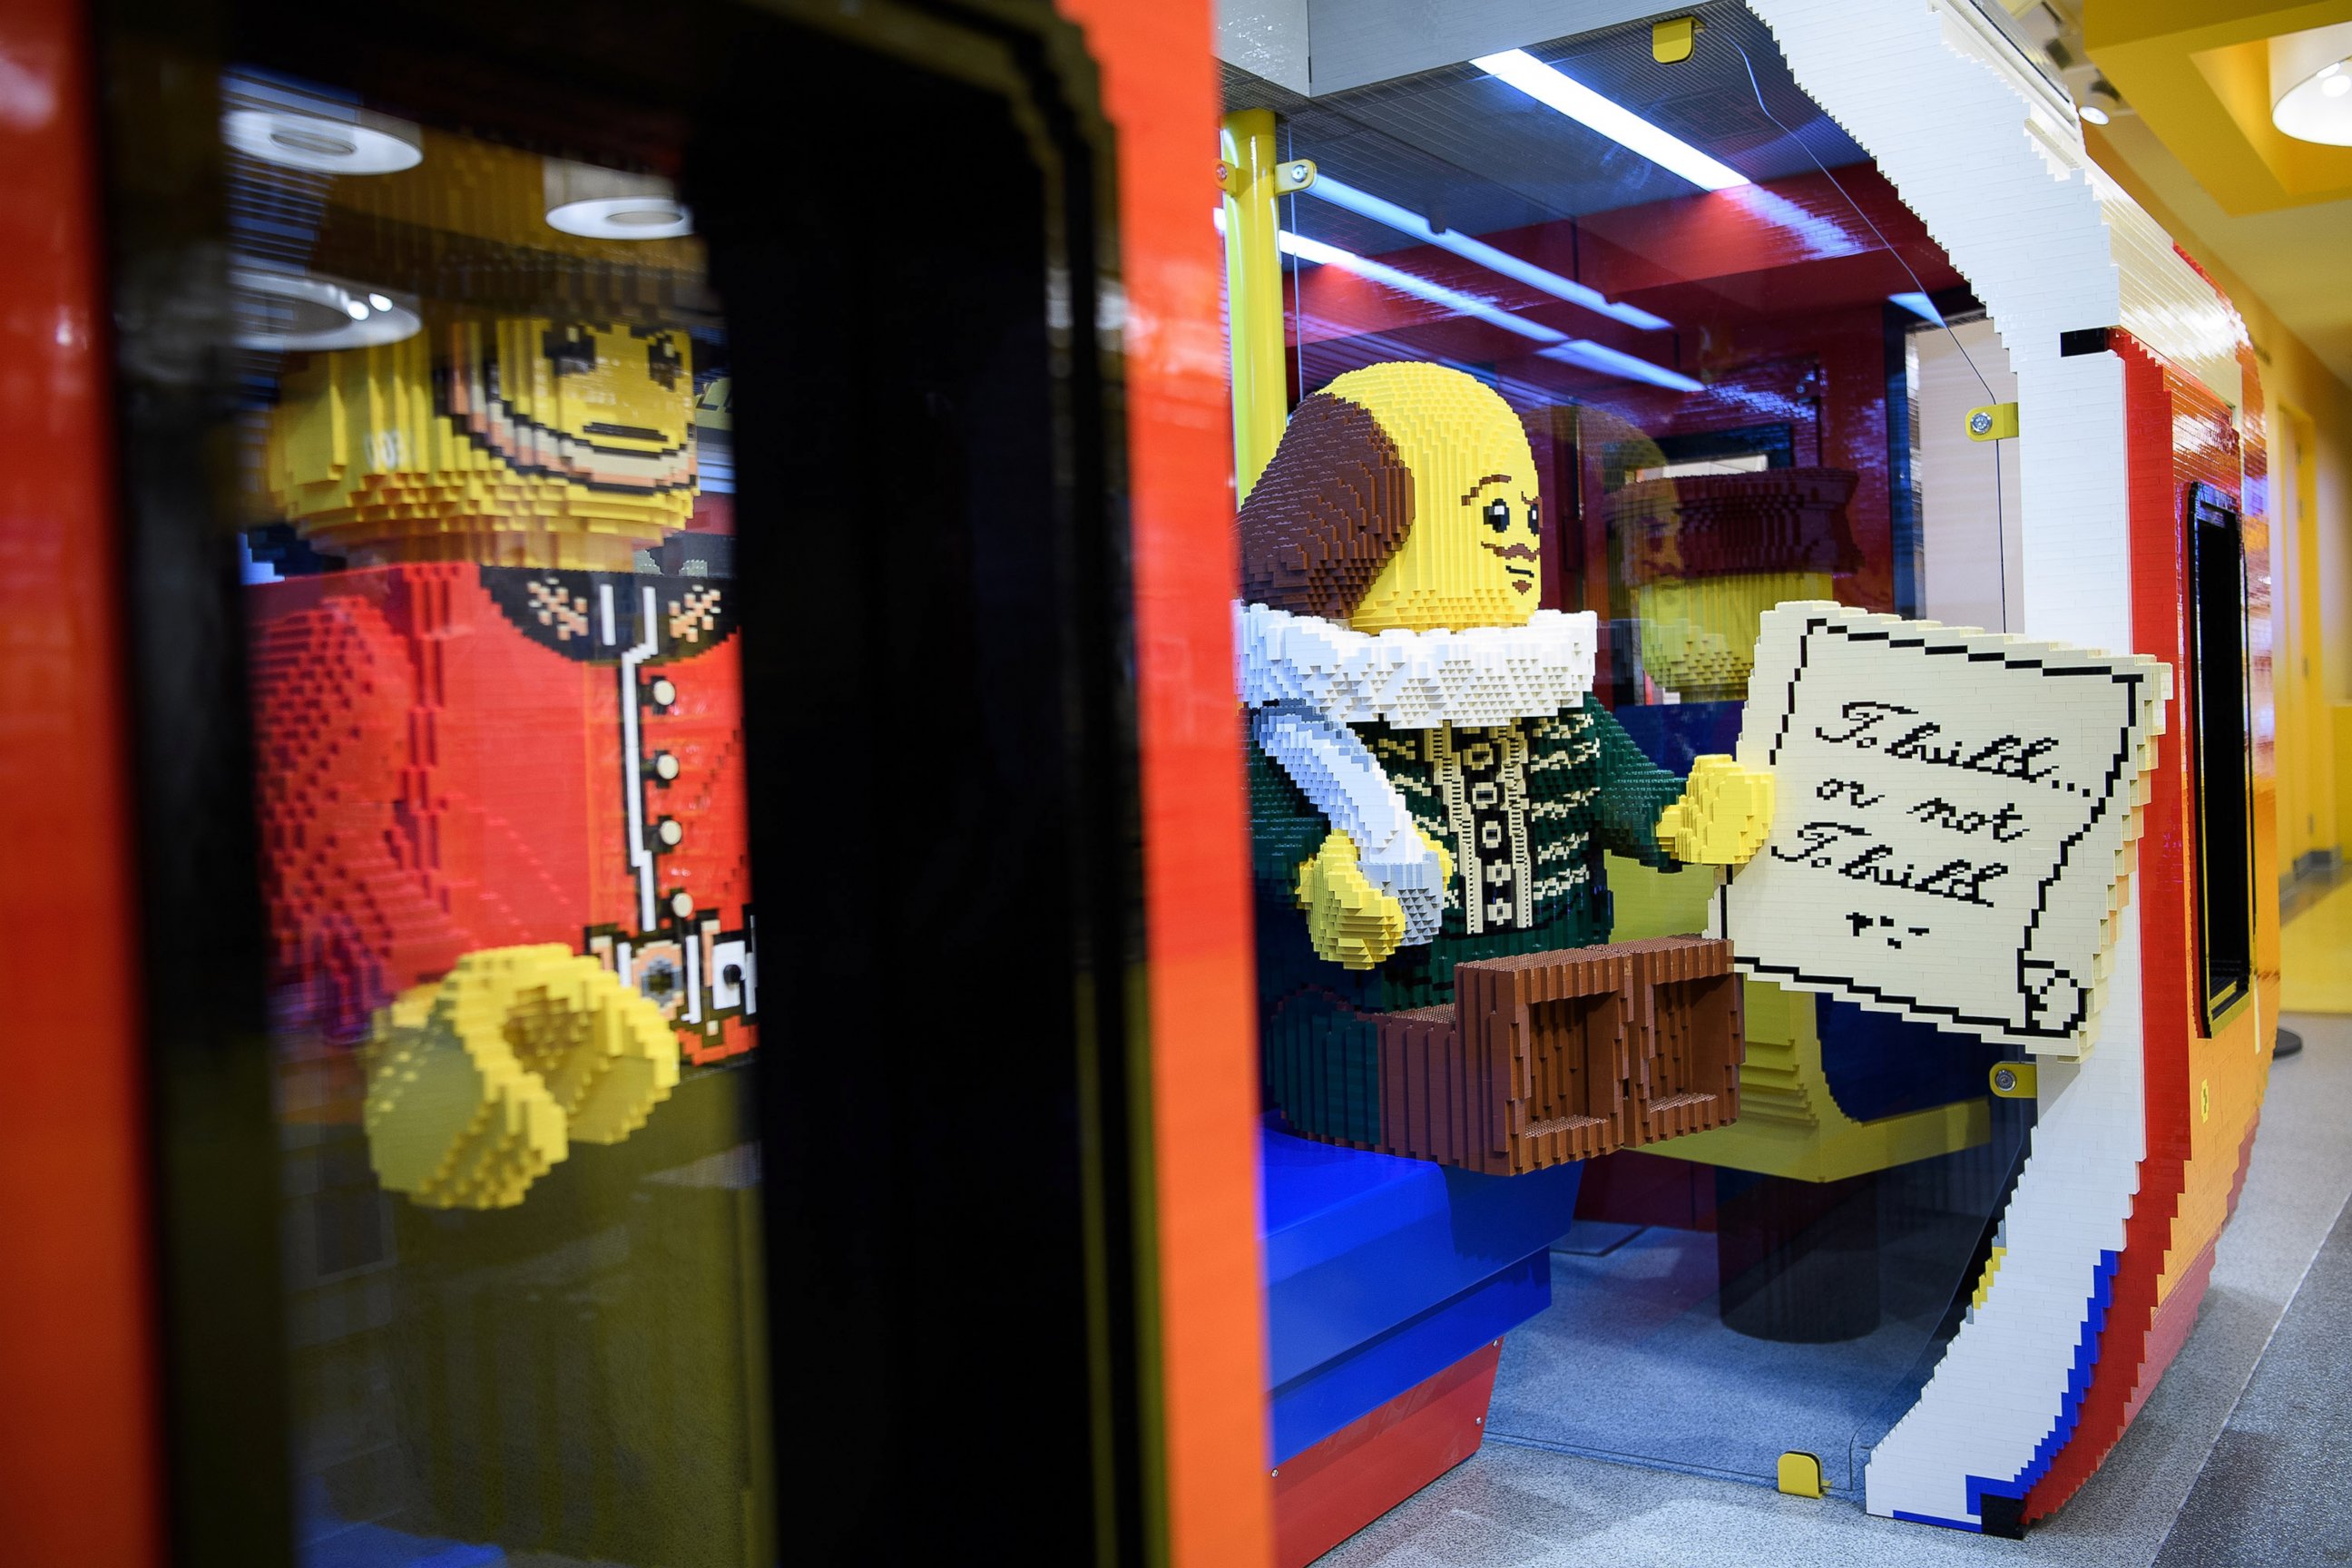 PHOTO: A lego model of playwright William Shakespeare is placed inside a large-scale model of a London underground train car, at the new flagship Lego store on Nov. 16, 2016 in London.